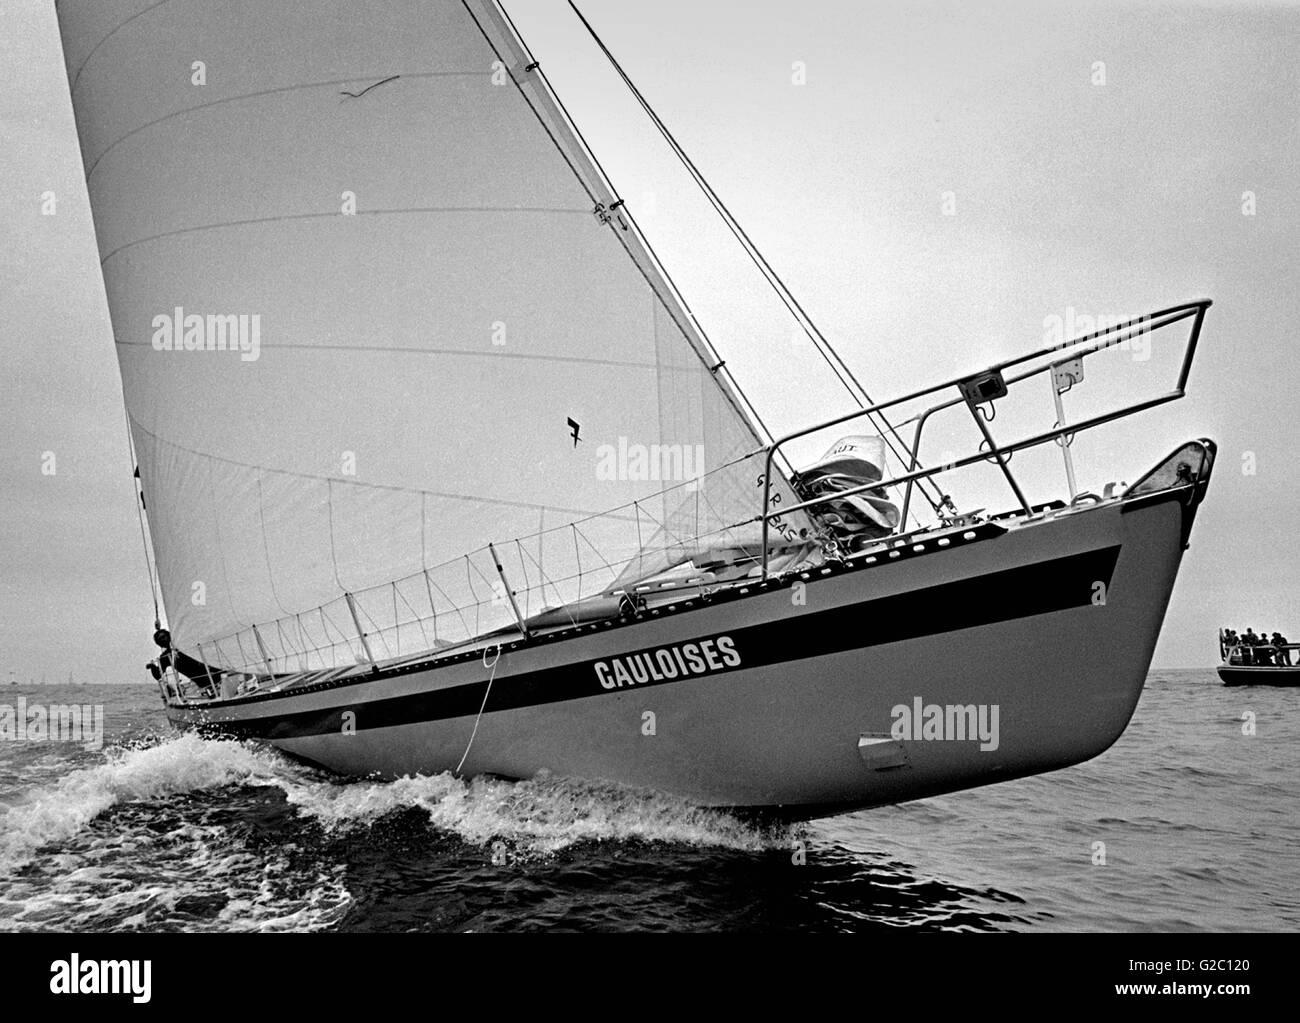 AJAX NEWS PHOTOS.1976. PLYMOUTH, ENGLAND. - OSTAR - SWISS SKIPPER PIERRE FEHLMANN PEERS AROUND THE HUGE GENOA OF HIS YACHT GAULOISES AT THE START OF THE RACE OFF PLYMOUTH. HE RETIRED. PHOTO:JONATHAN EASTLAND/AJAX. REF:2760506/21 Stock Photo